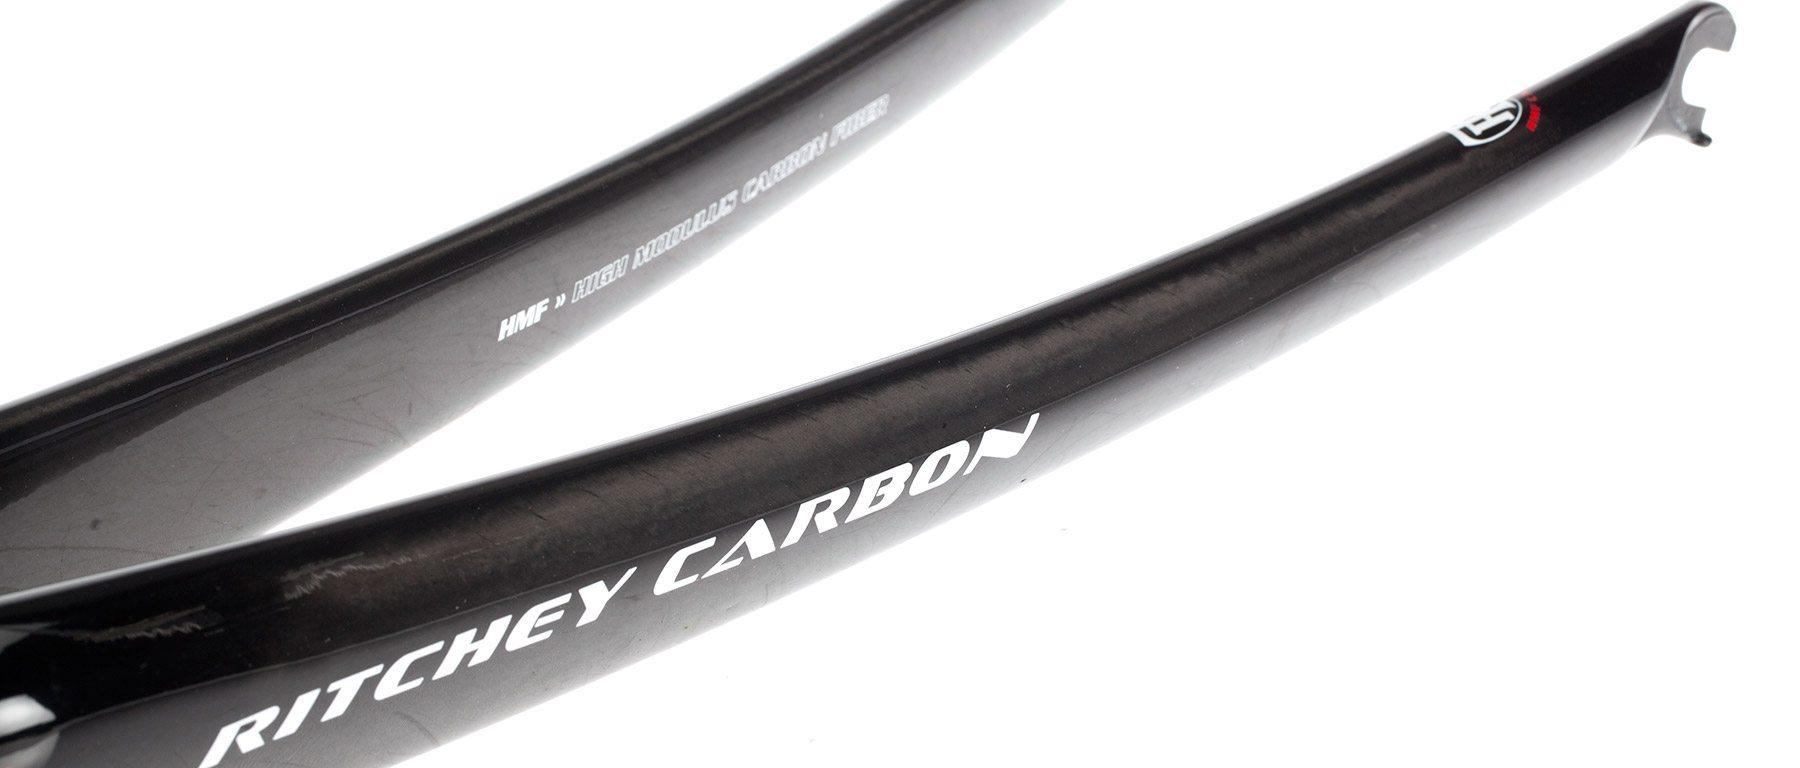 Ritchey Comp UD Carbon Fork